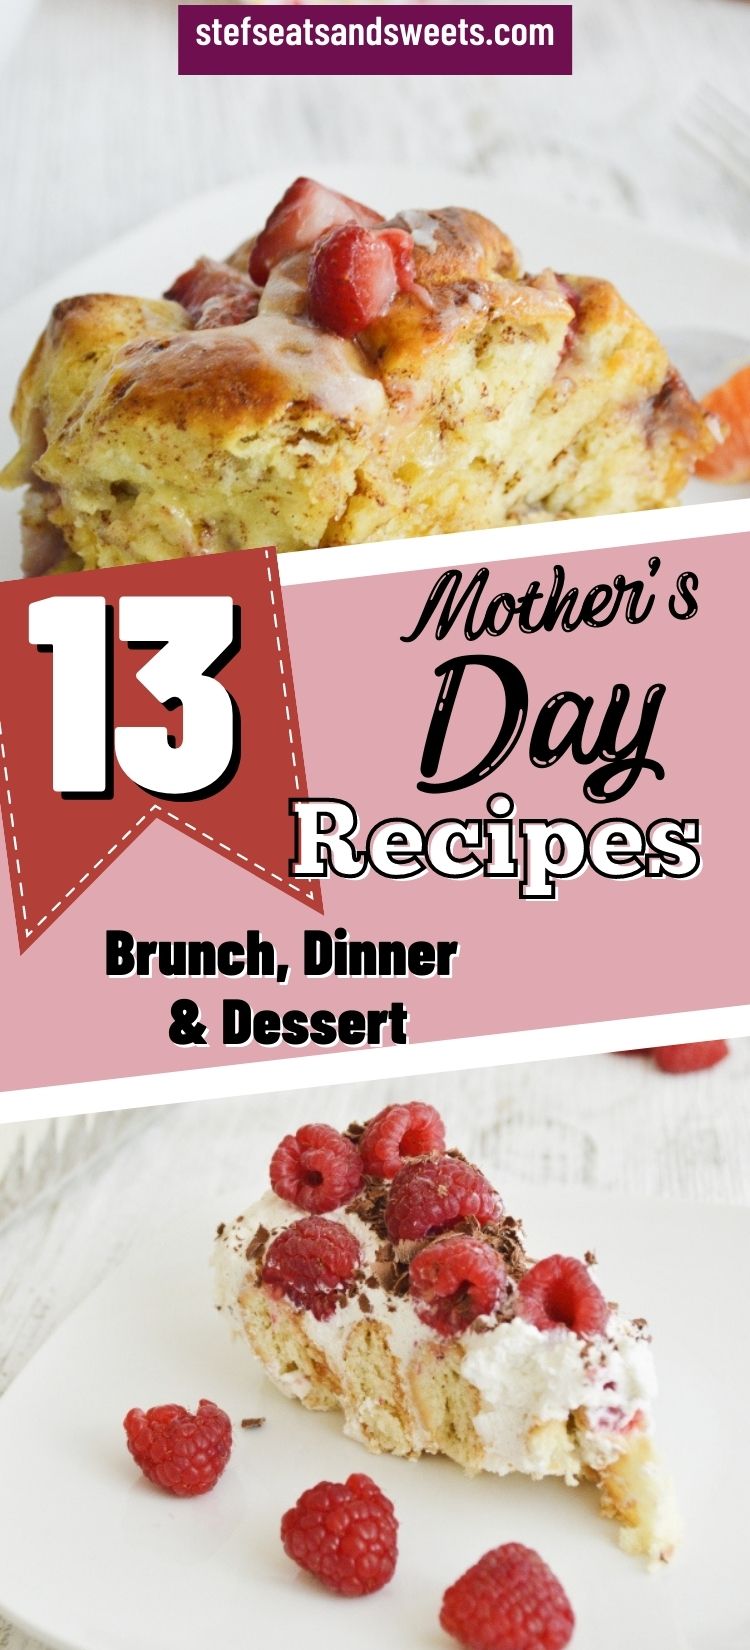 Ideas and recipes for Mother's Day